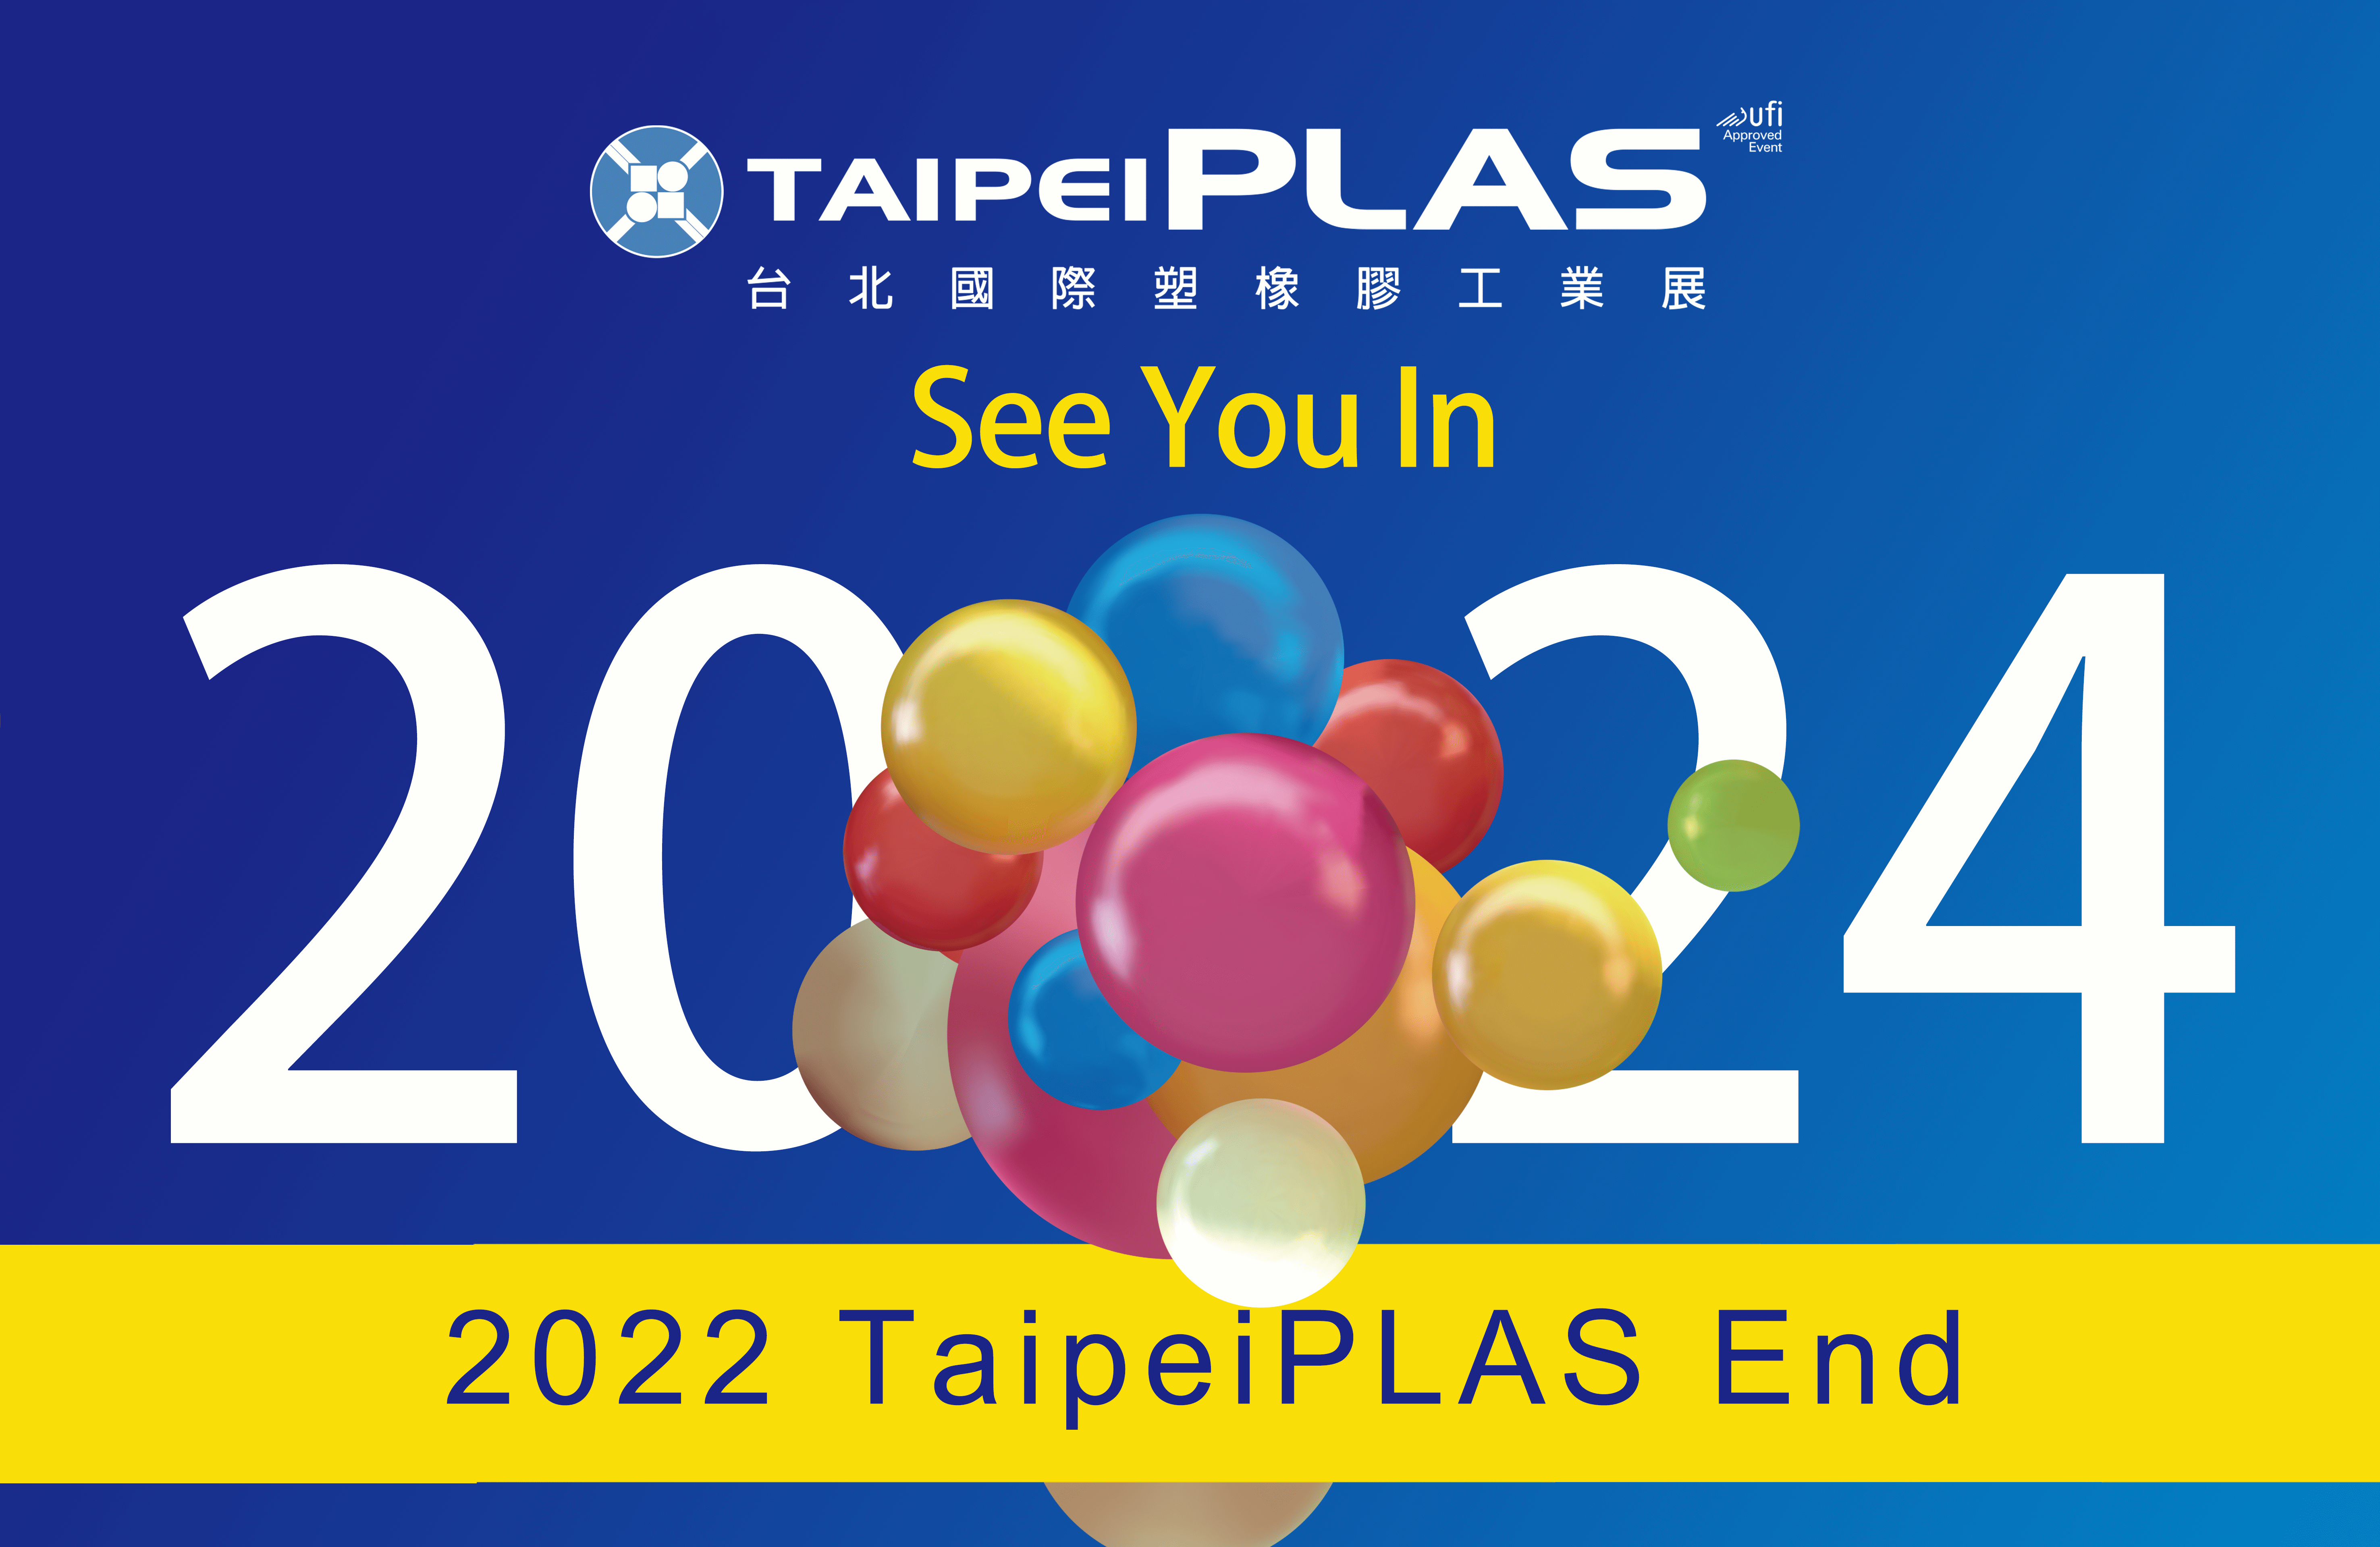 The 2022 Taipei International Plastics & Rubber Industry Show coming up after 4 years!